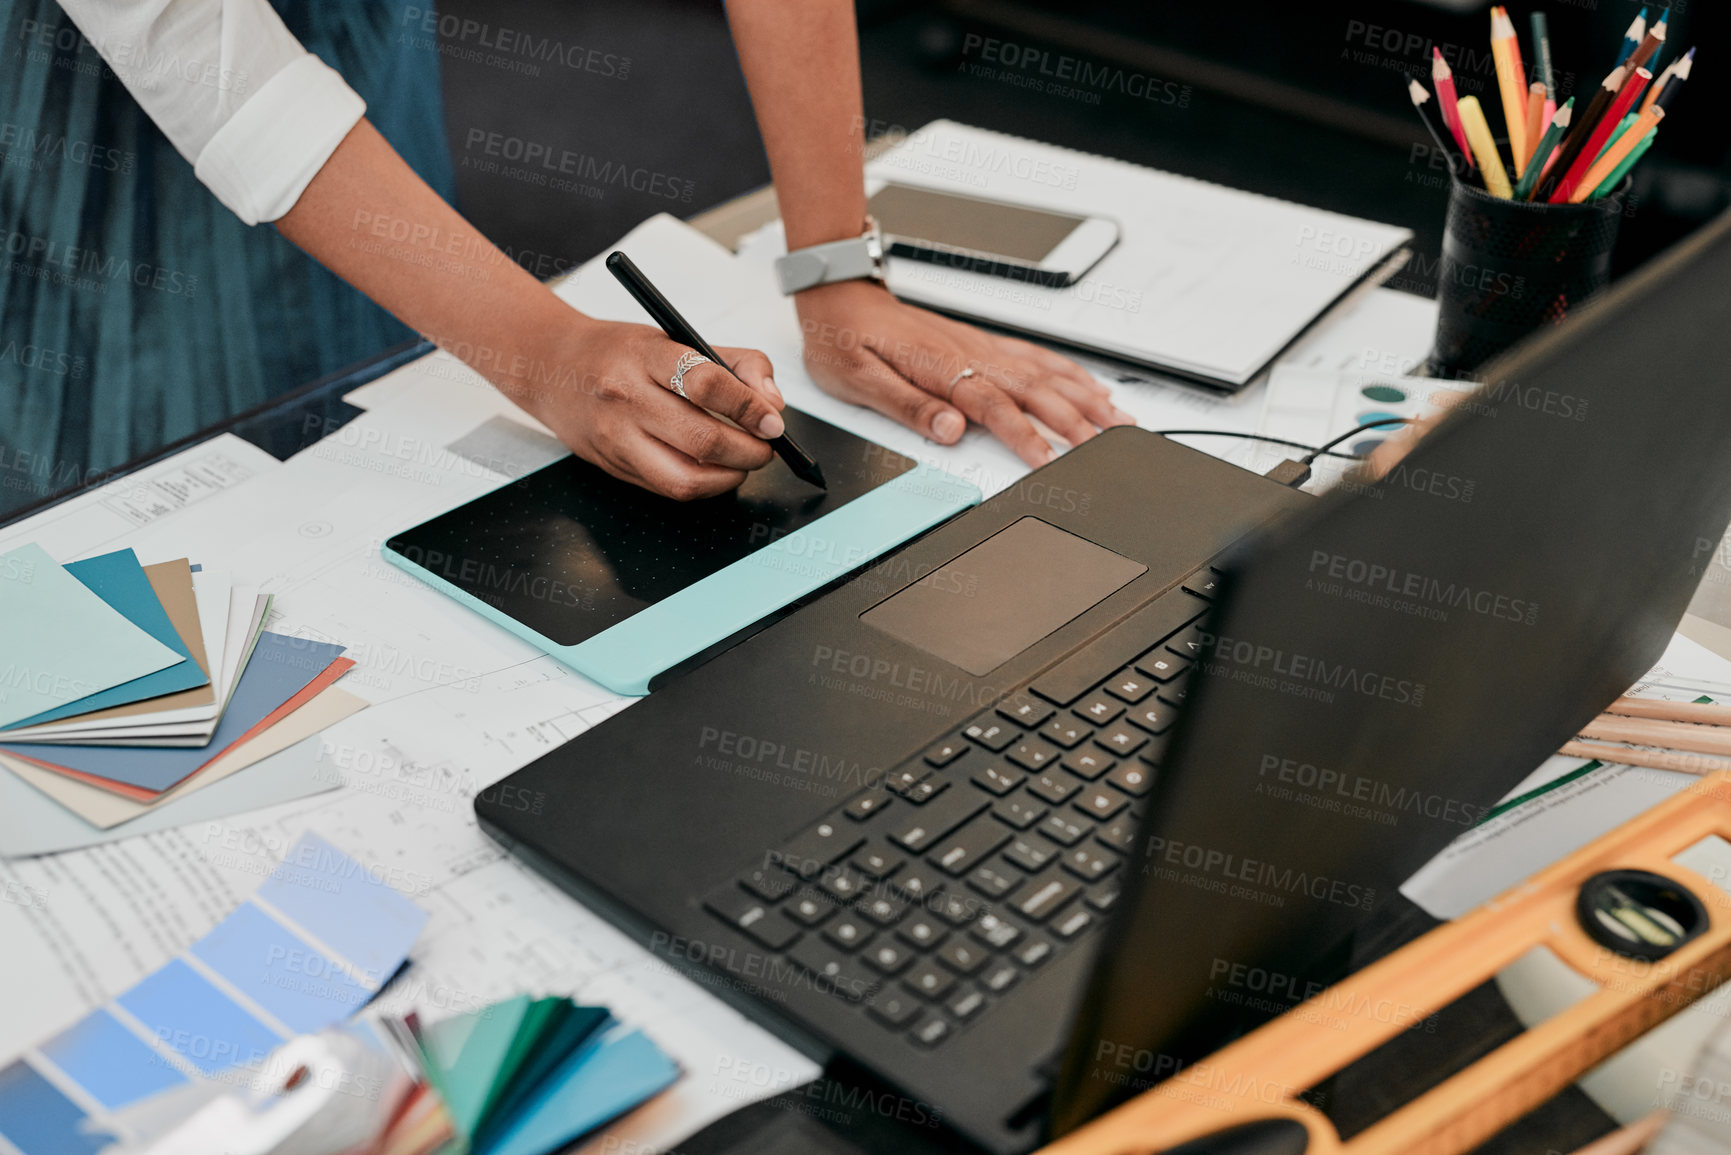 Buy stock photo Cropped shot of an unrecognizable designer working on her laptop